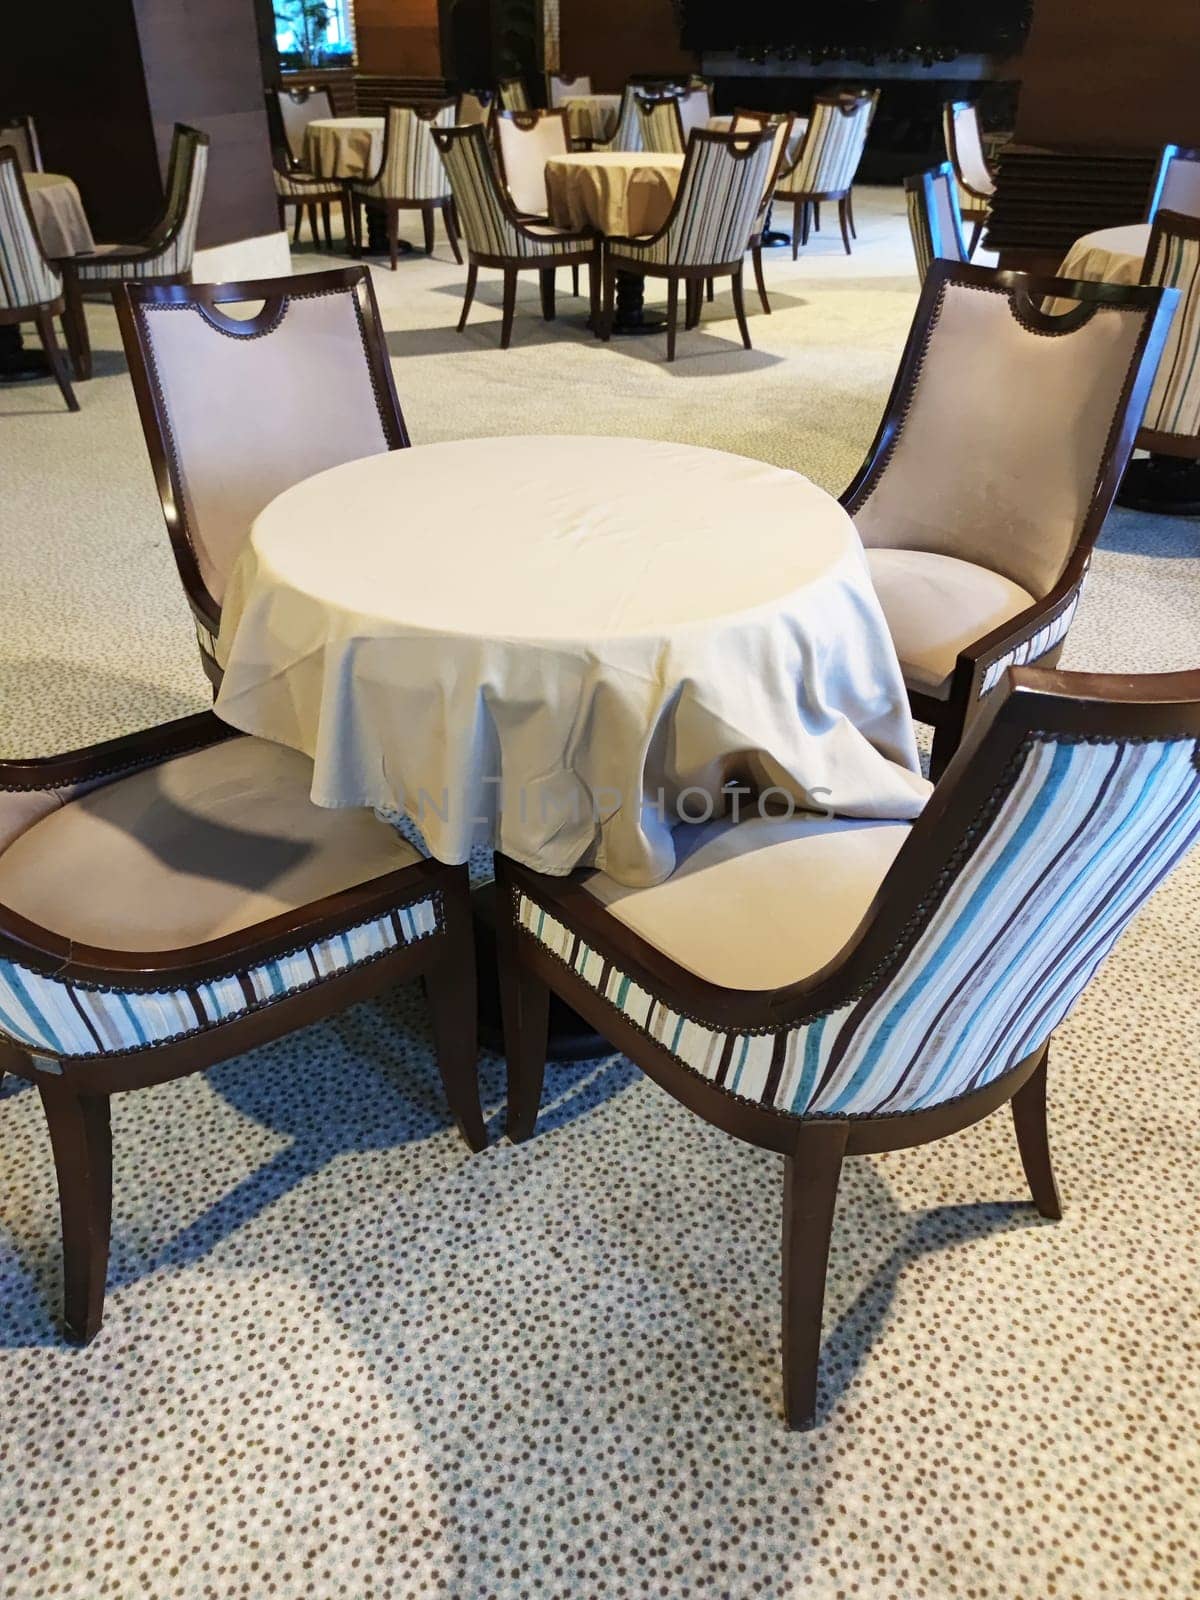 elegant dining chairs and round table in restaurant interior by Annado